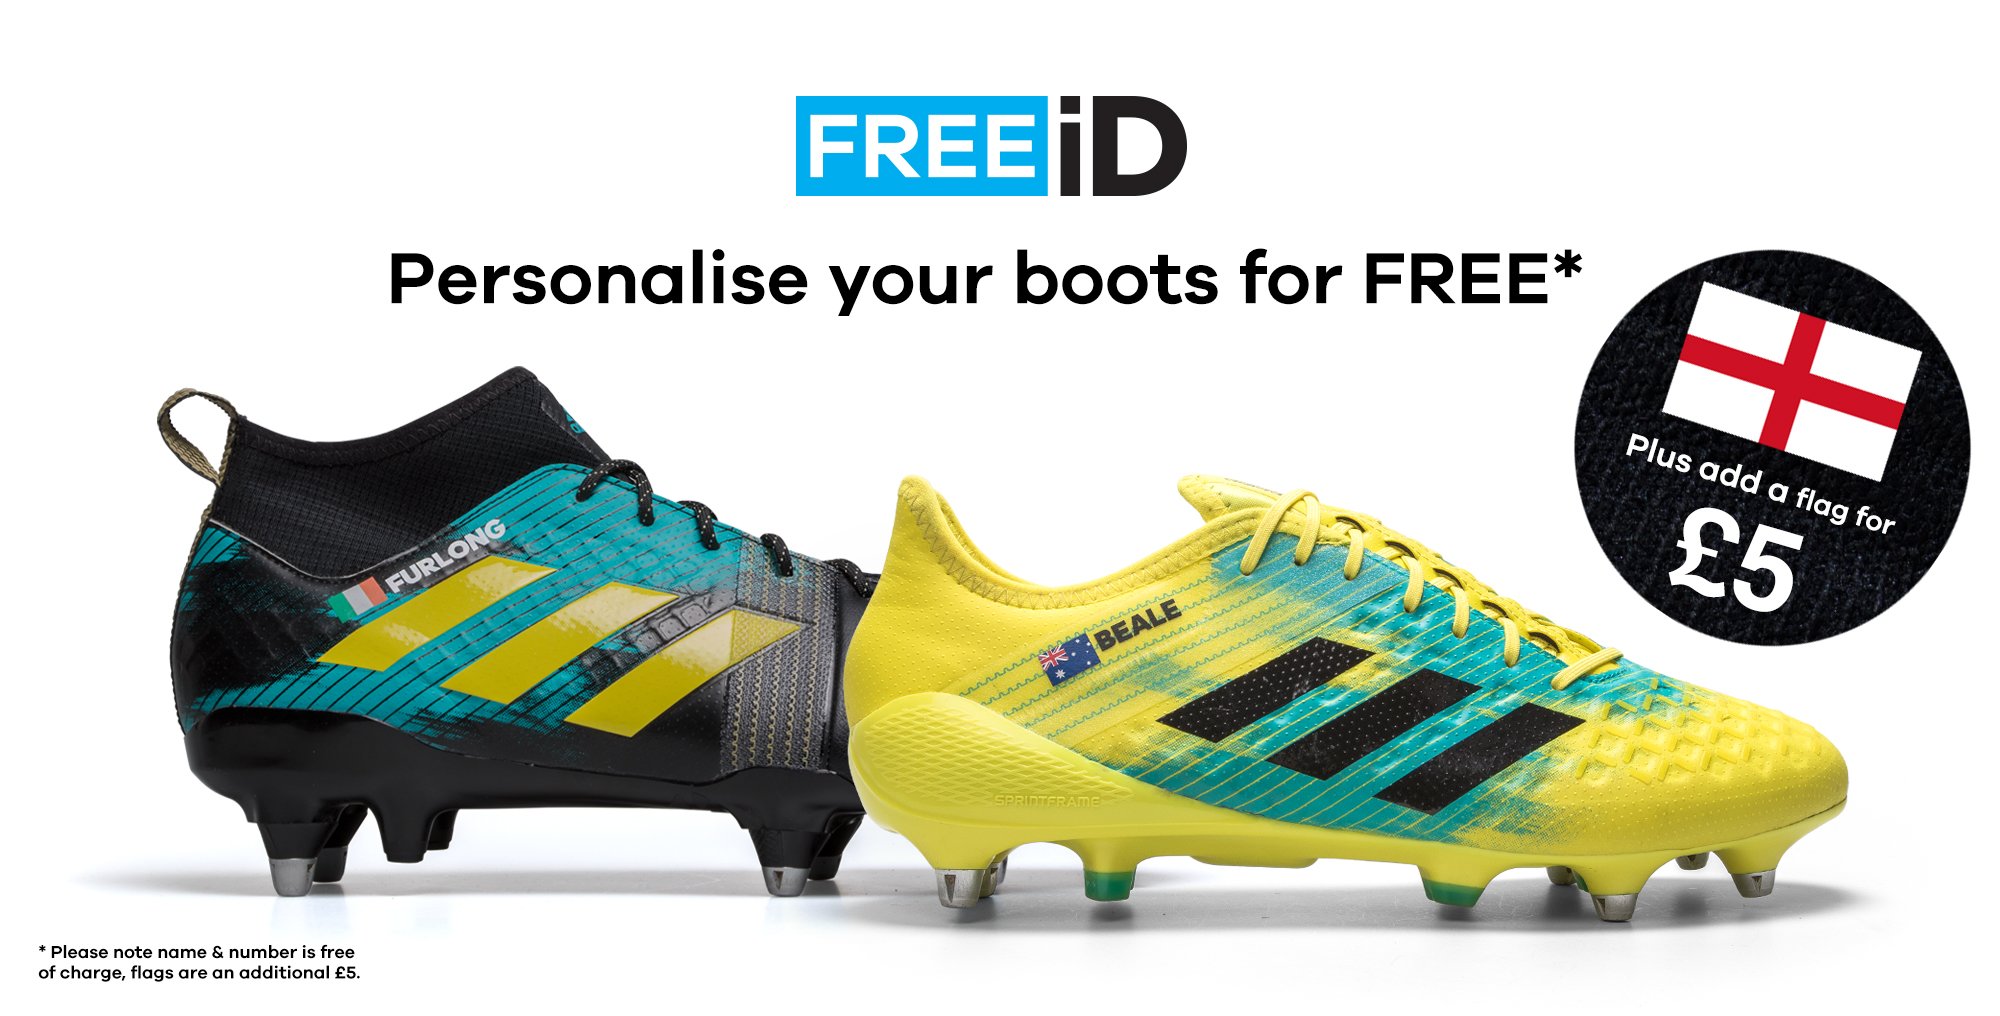 FREE iD - FREE Boot Personalisation 